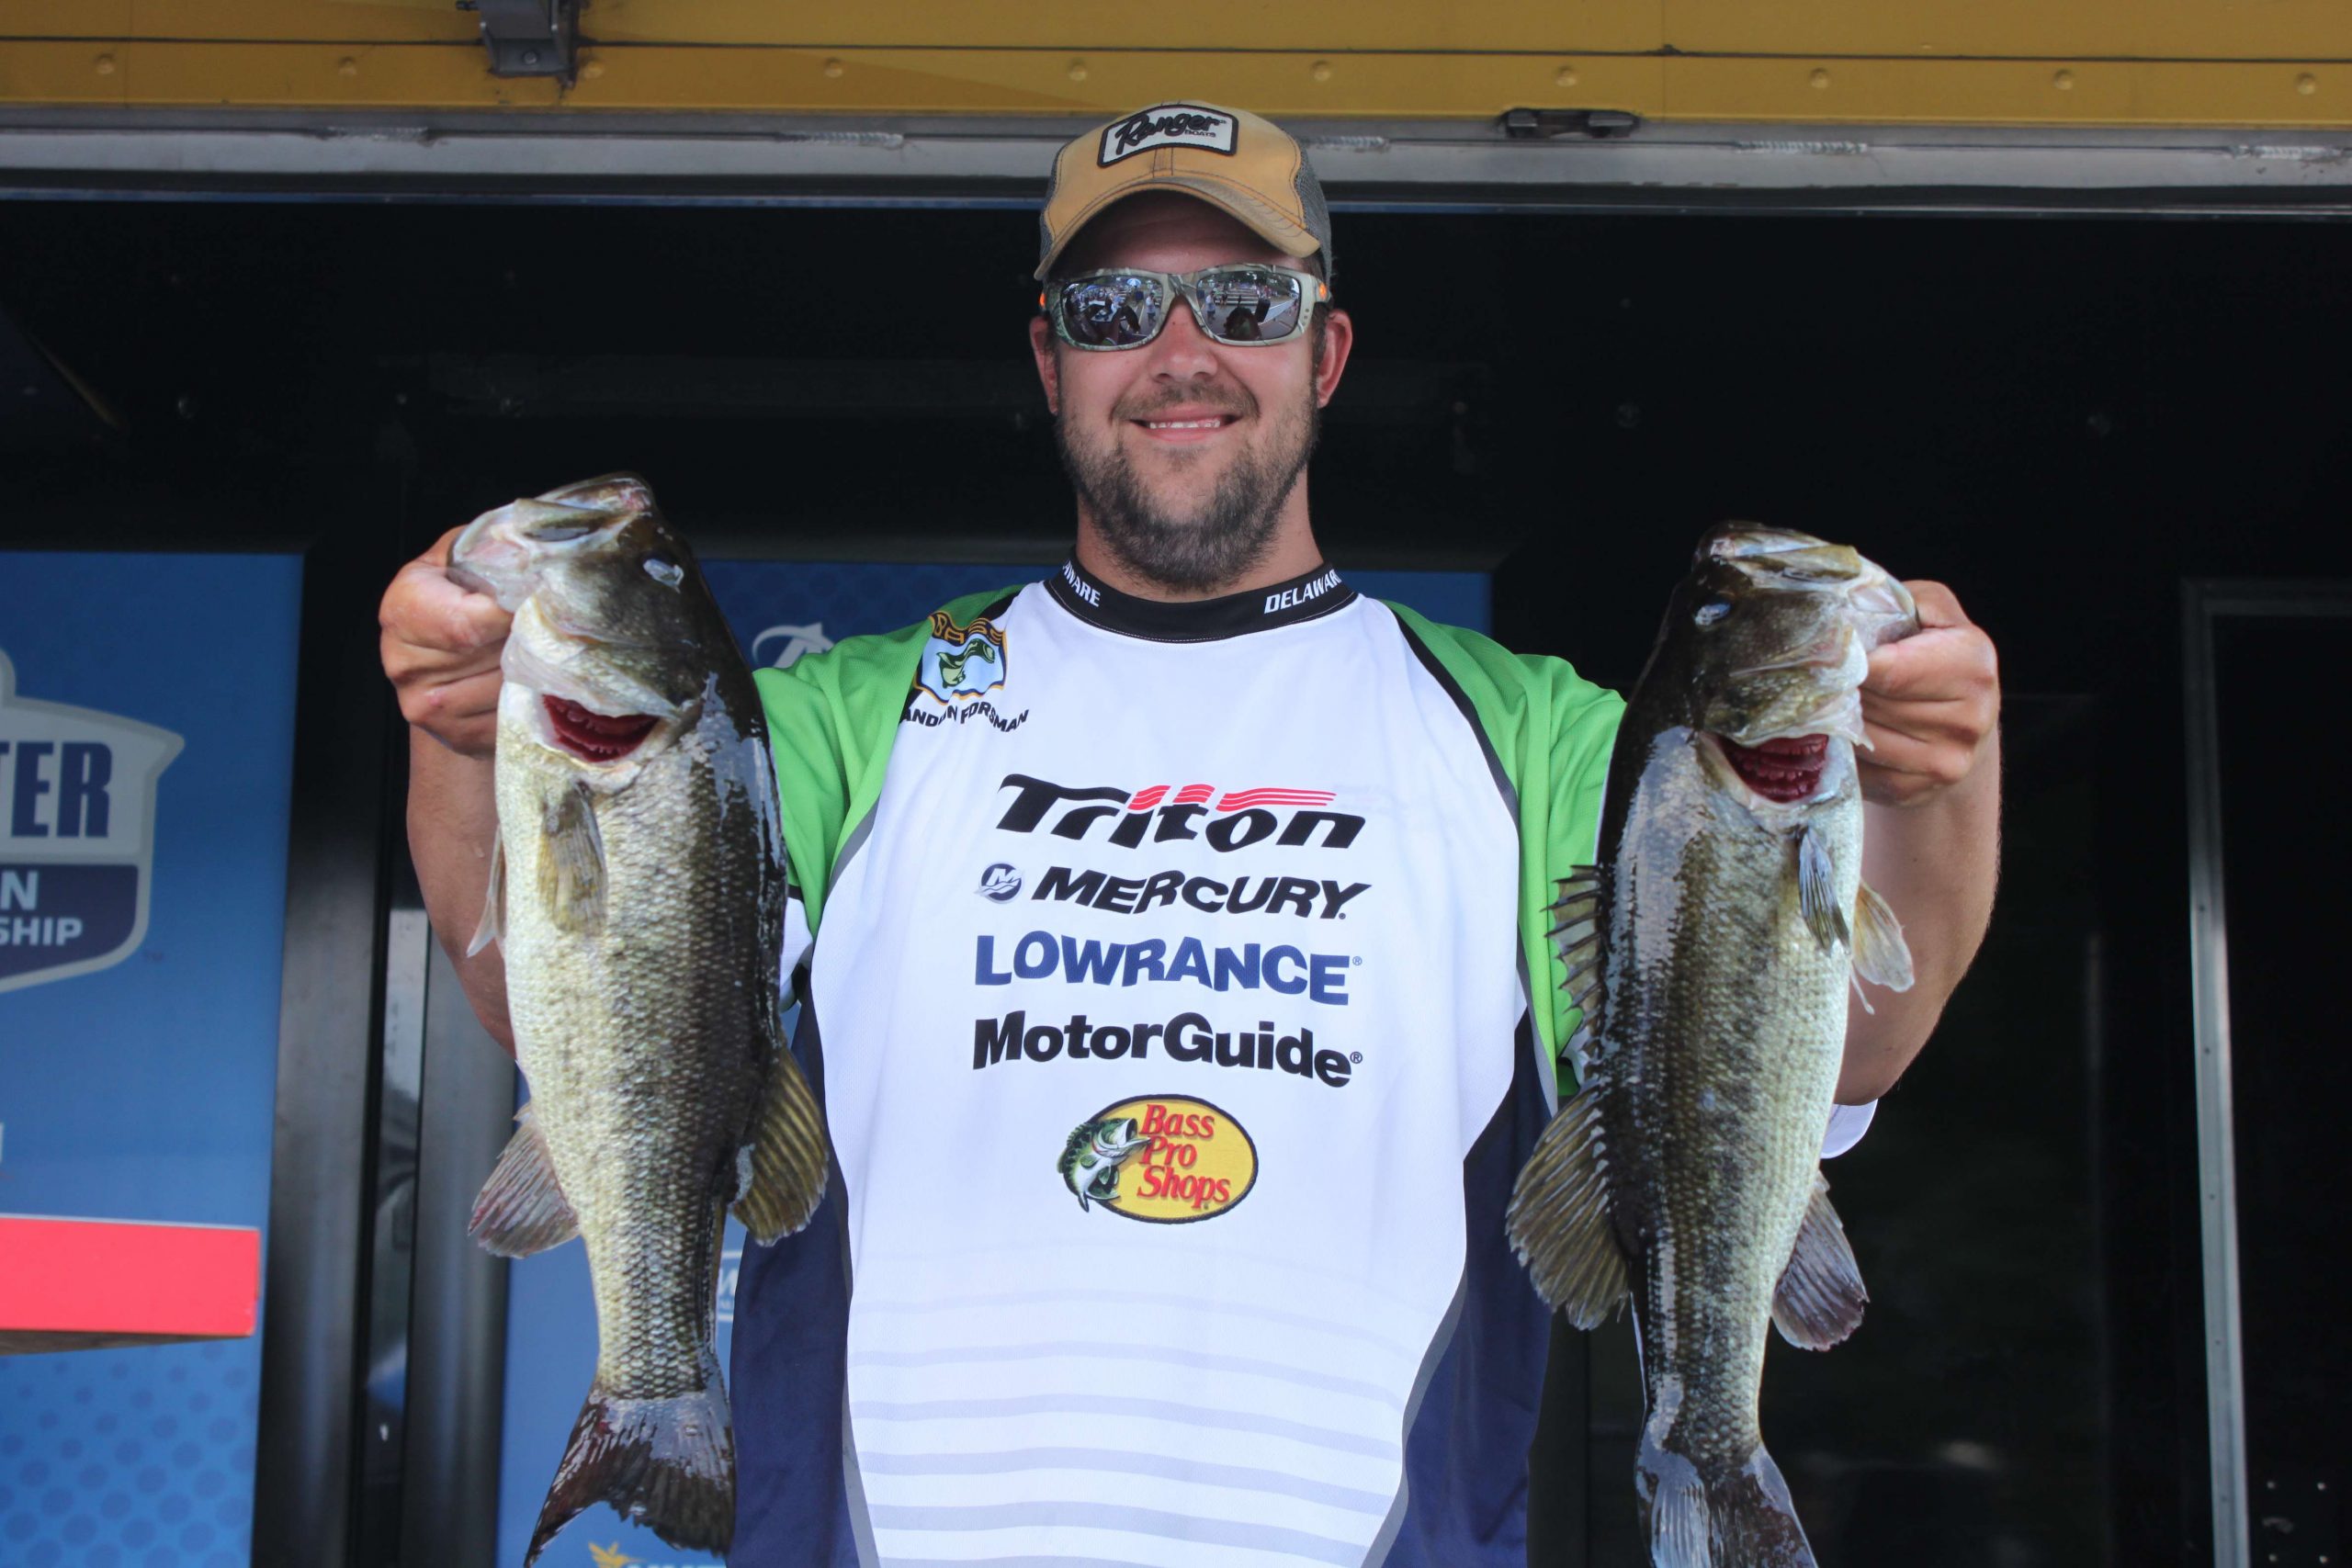 Brandon Forsman of Team Delaware caught two bass in the non-boater division, but they were nice ones, for sure. He has a 6-13 total after Day 1, which has him in fifth place.